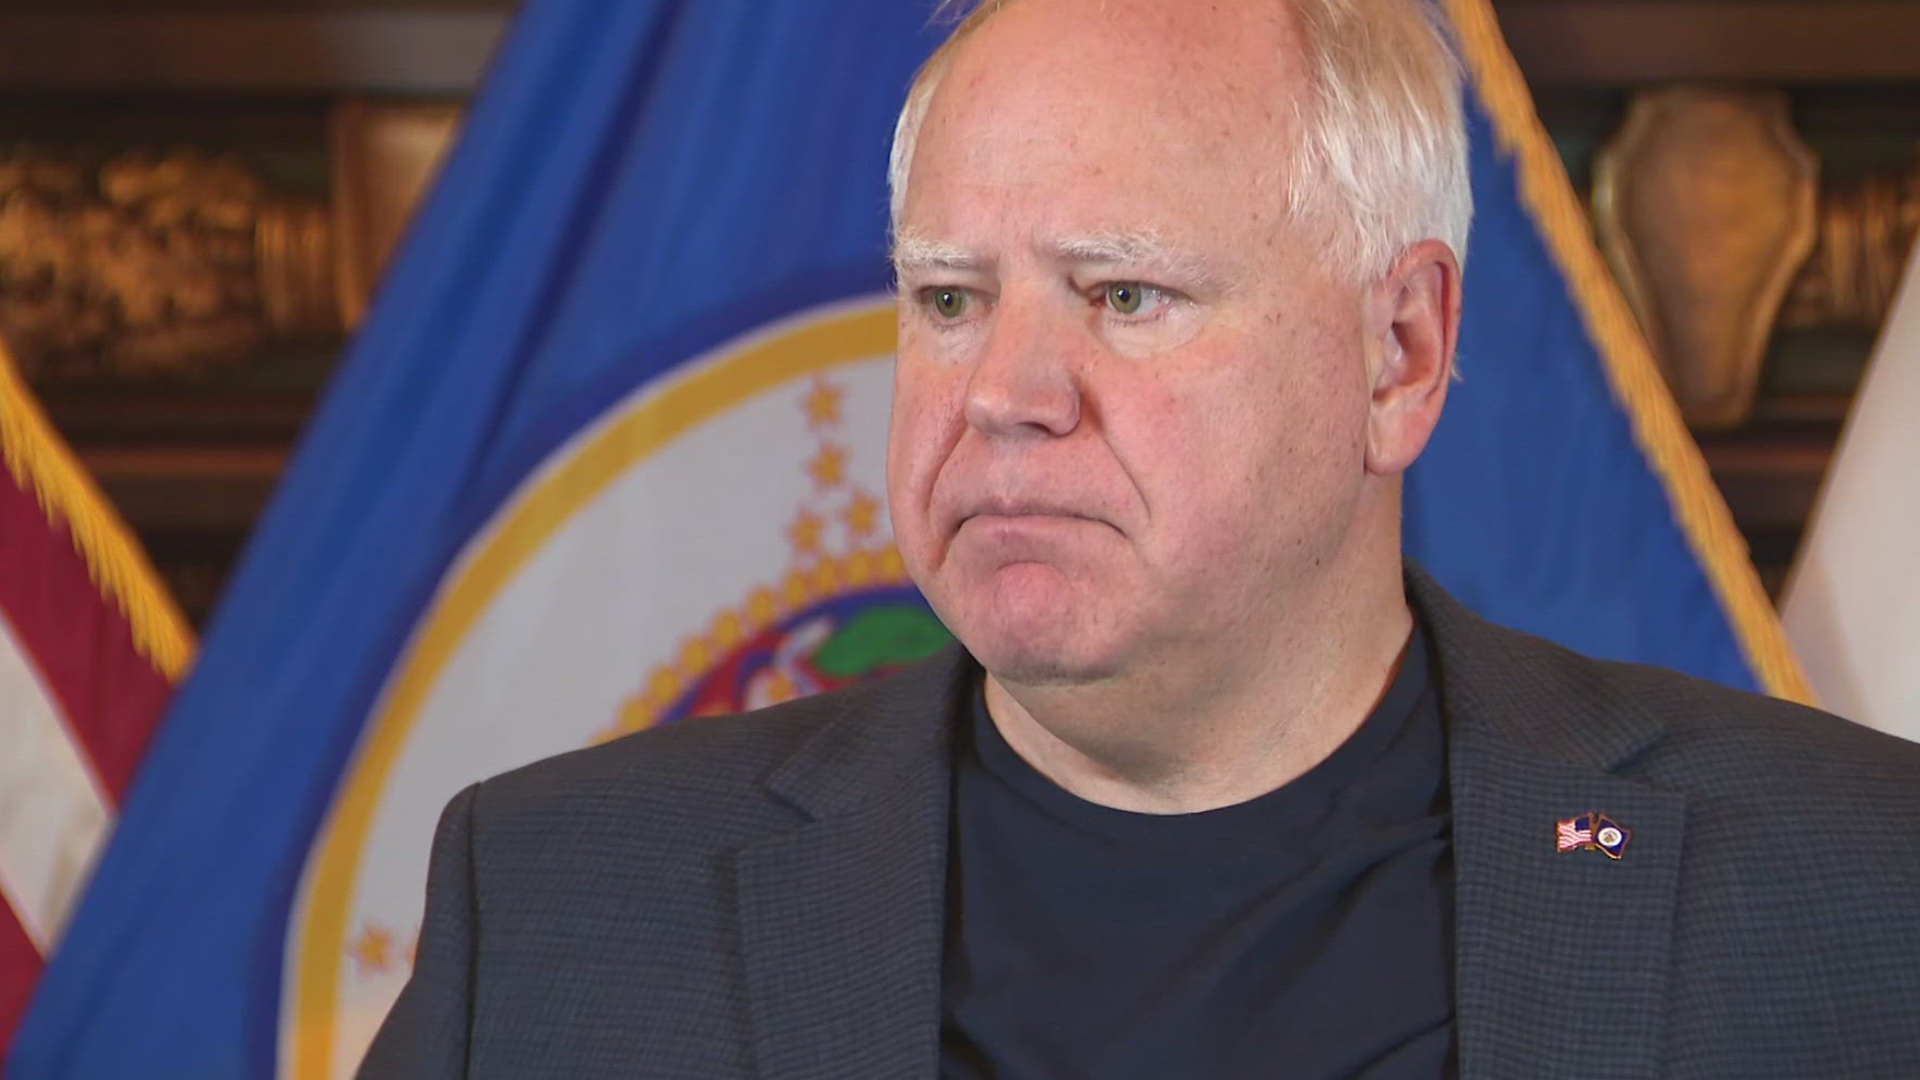 The governor met with a group of DFL lawmakers Tuesday over a recent exodus of school resource officers, saying it's a matter of explaining the law, not changing it.